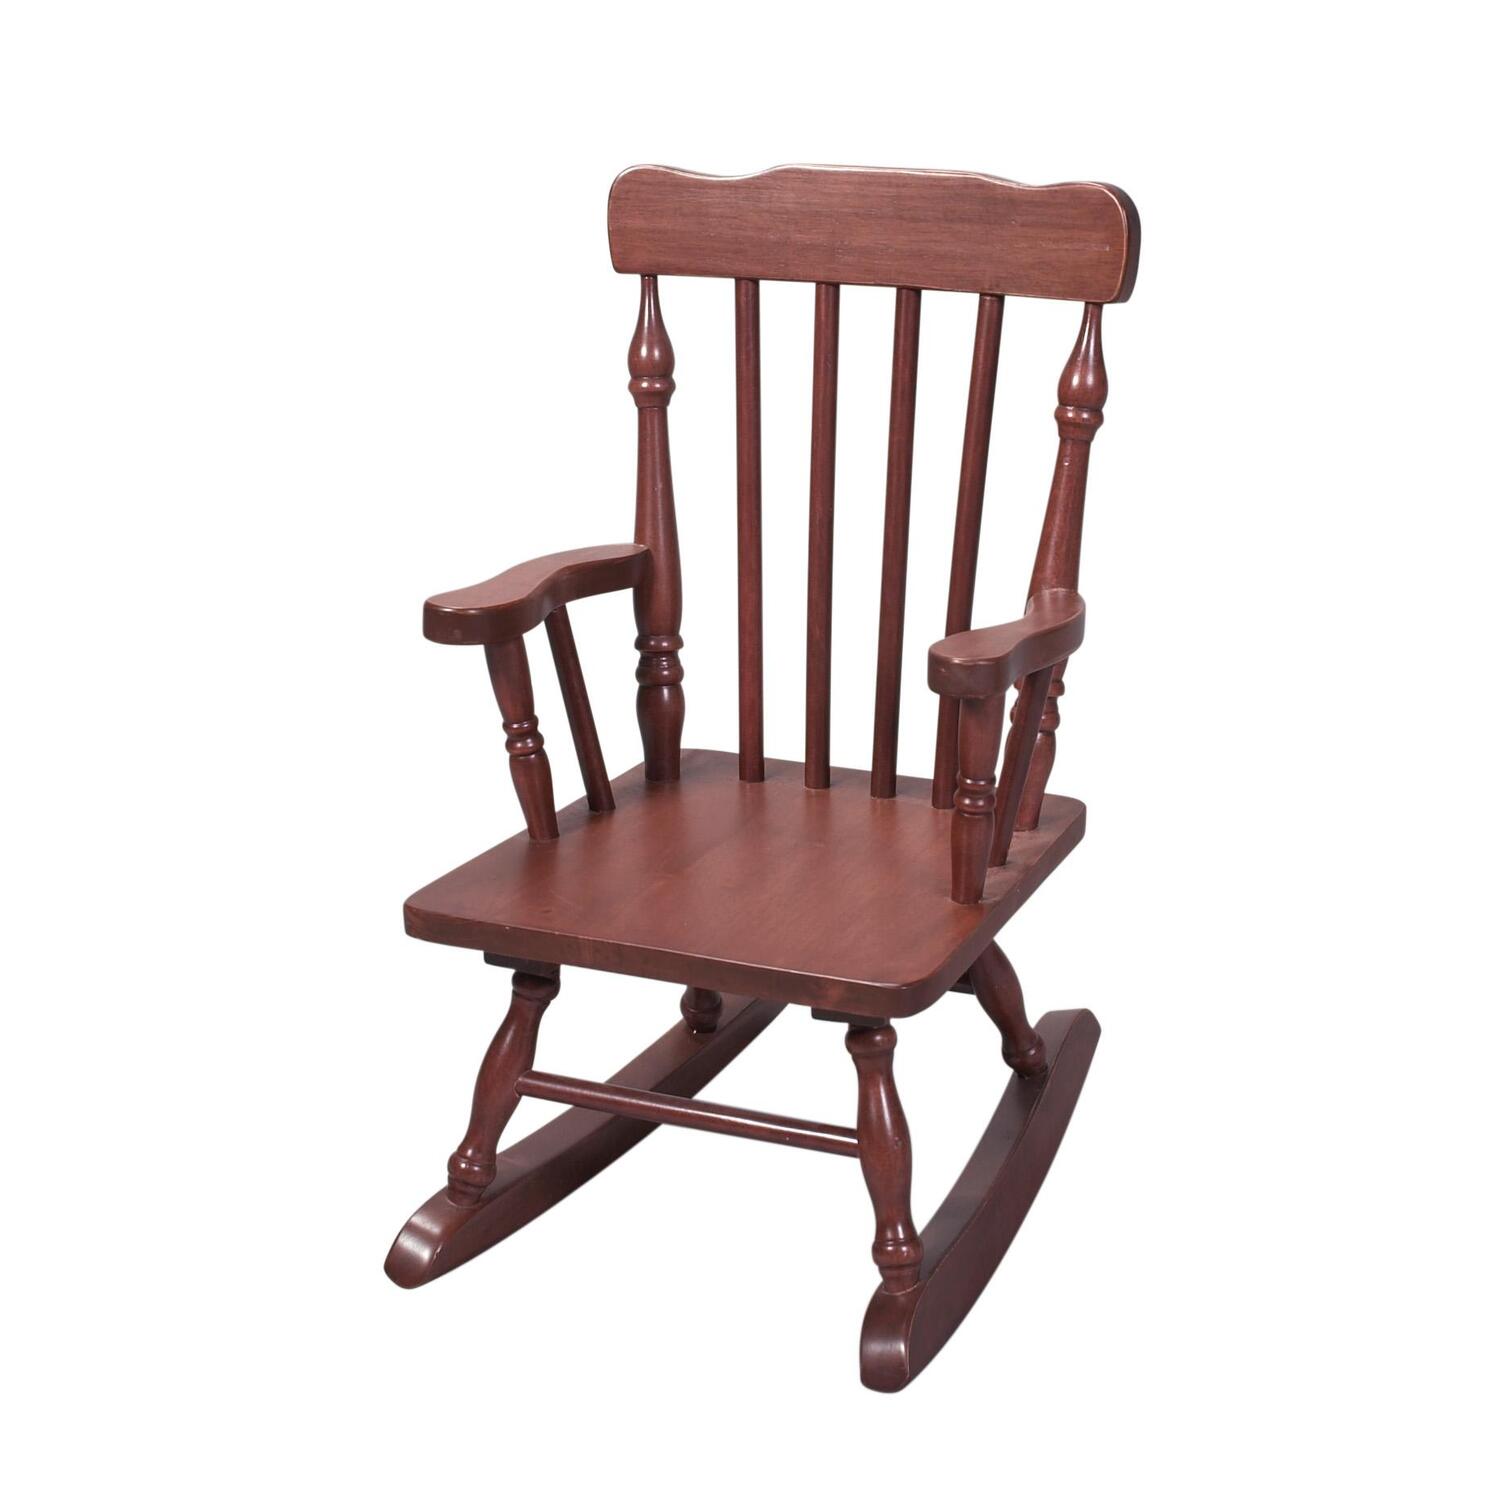 Gift Mark Childs Spindle Rocking Chair Cherry